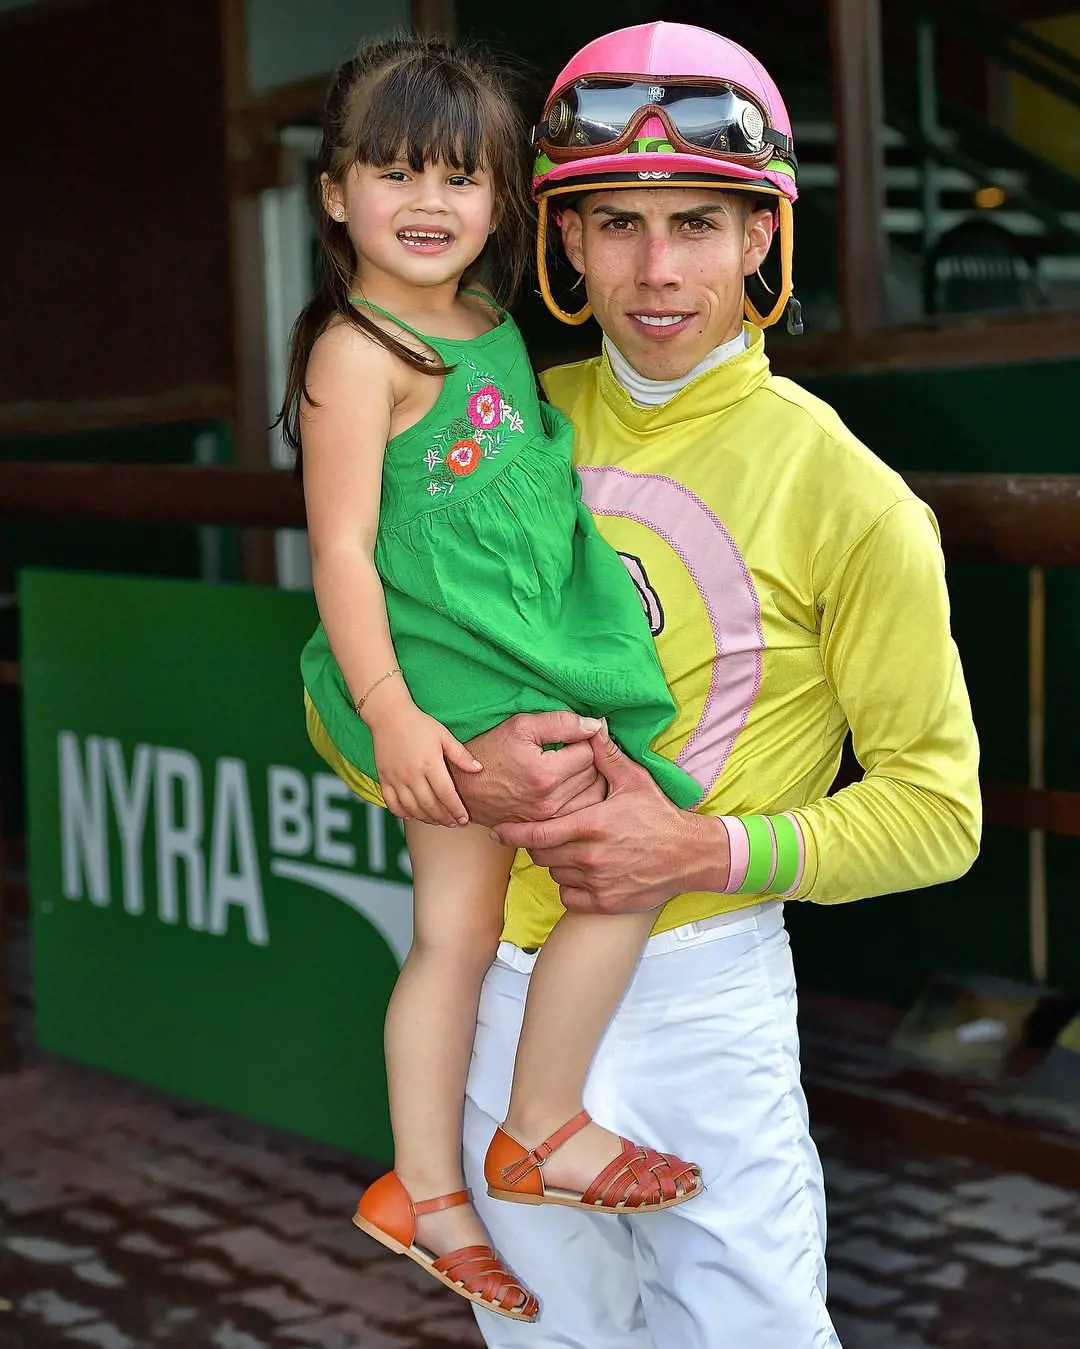 Sarai cheering up Irad during his race on June 30, 2018. 